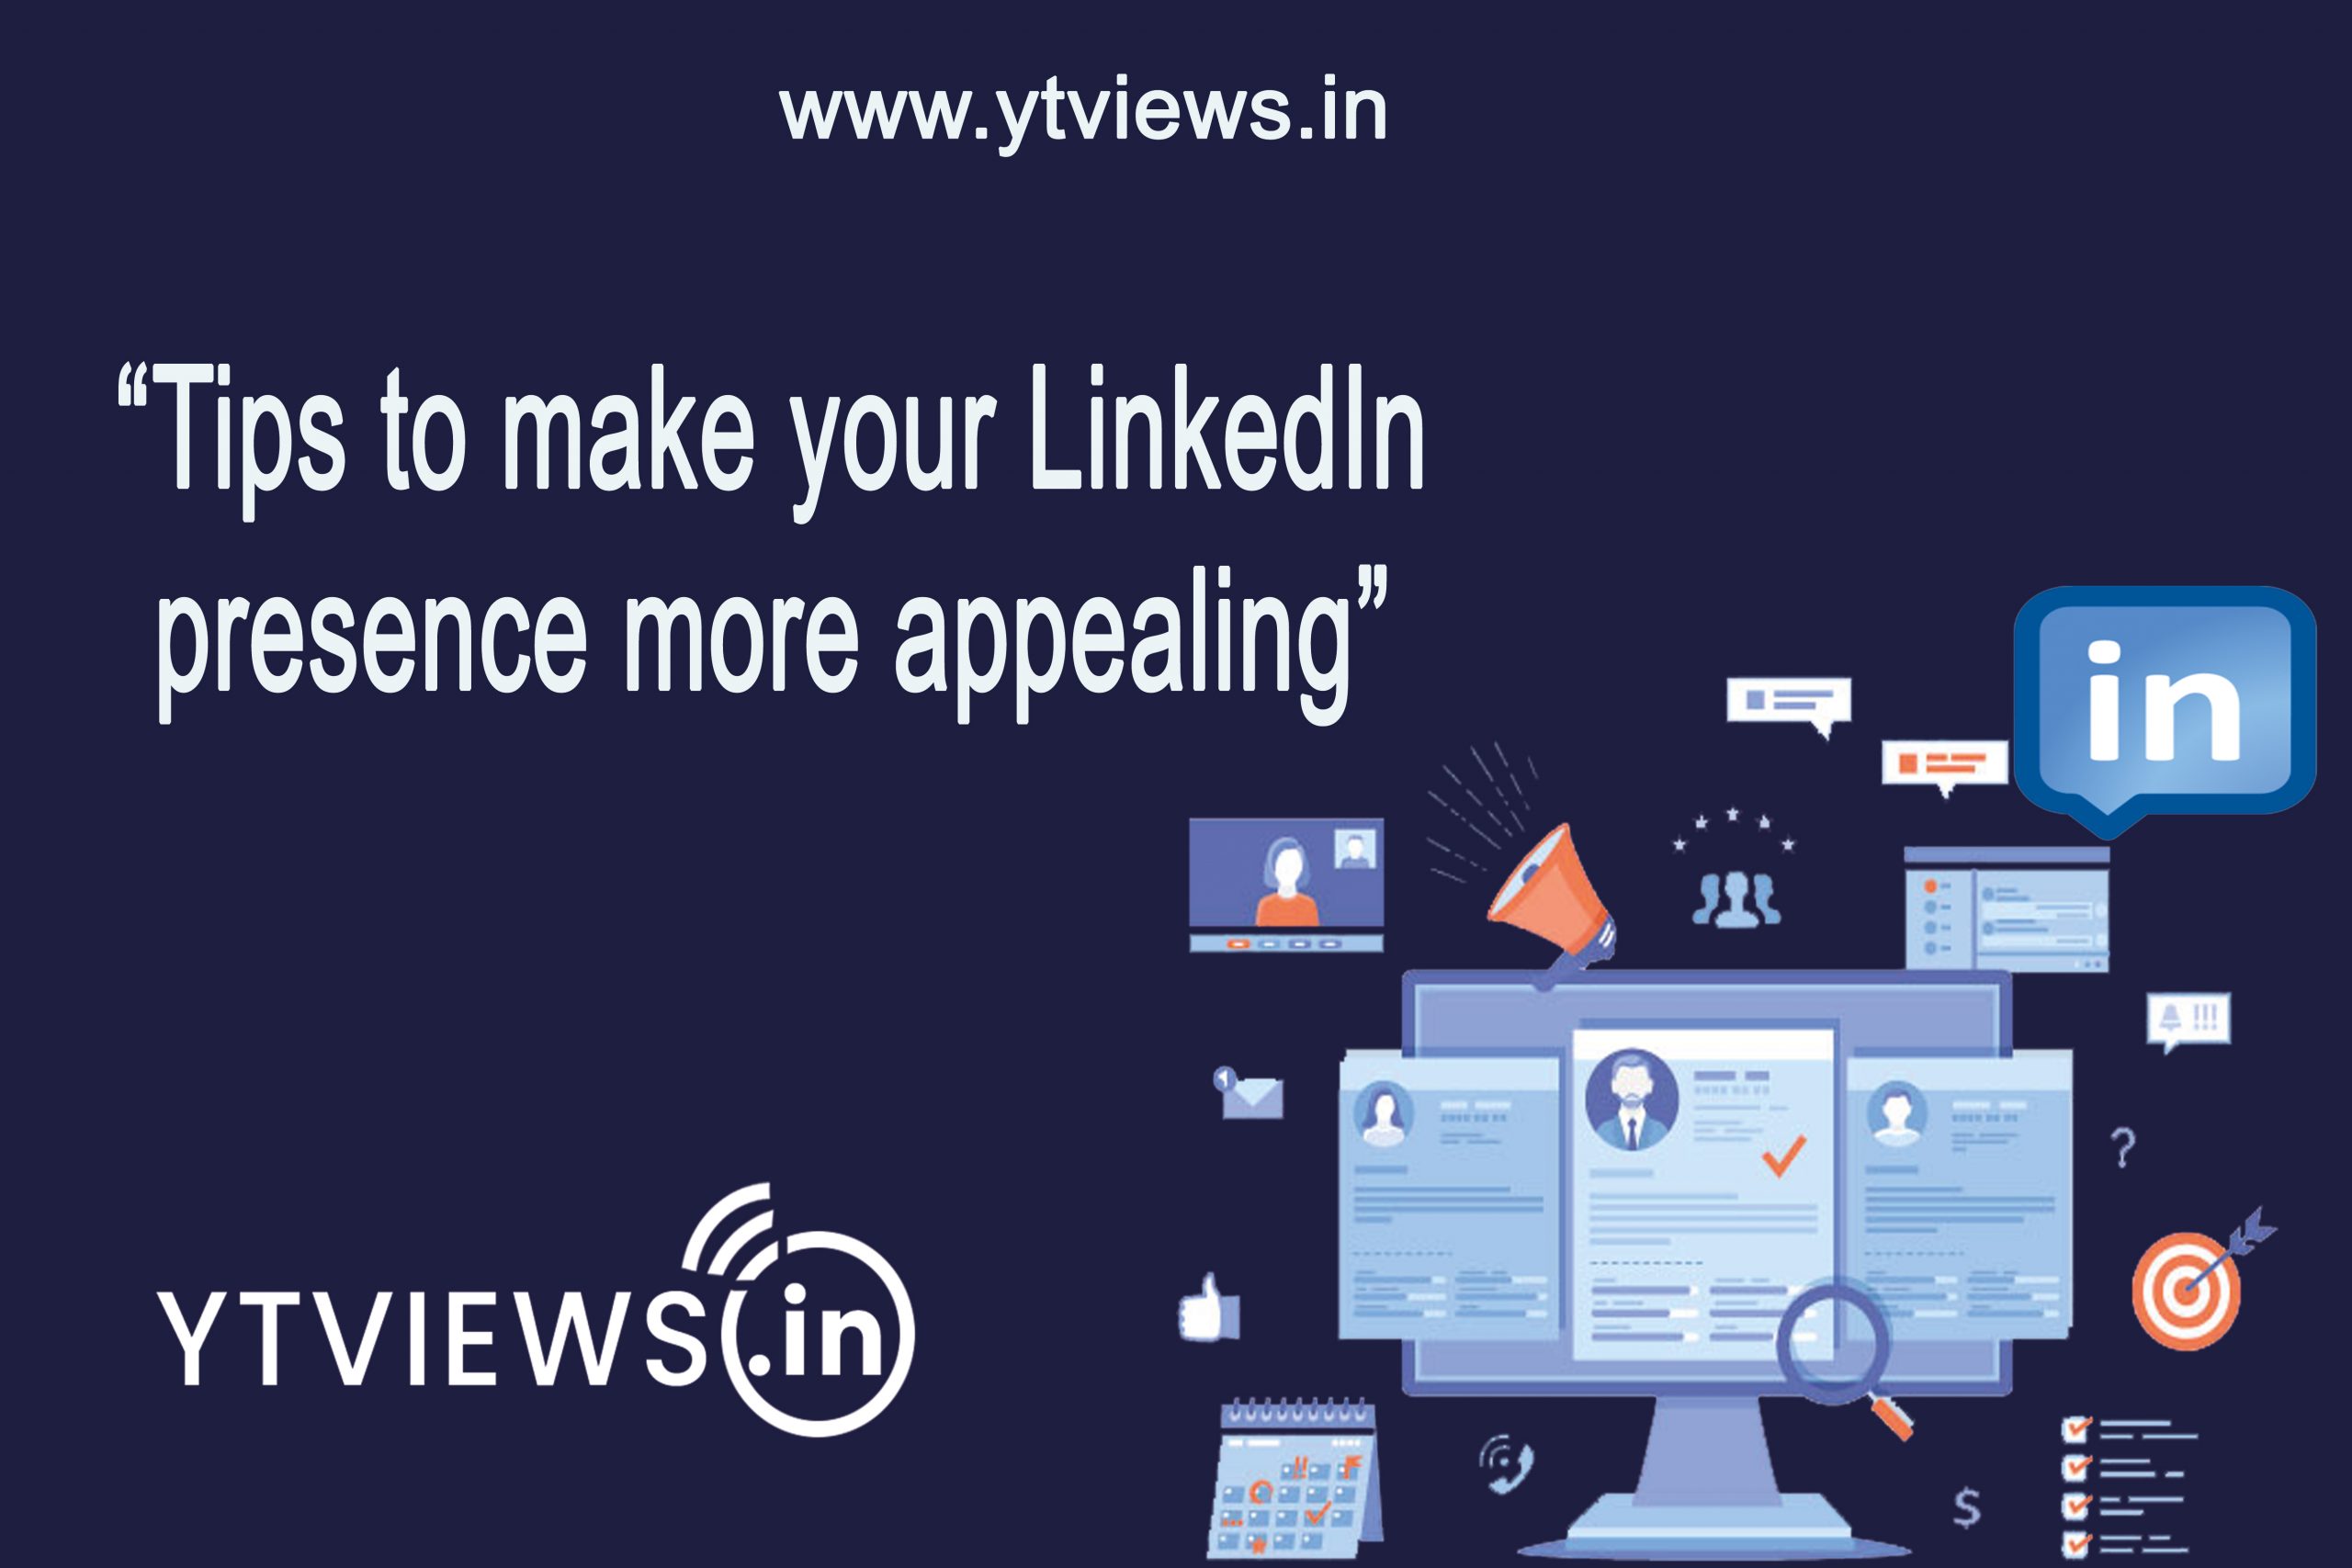 Tips to make your LinkedIn presence more appealing.